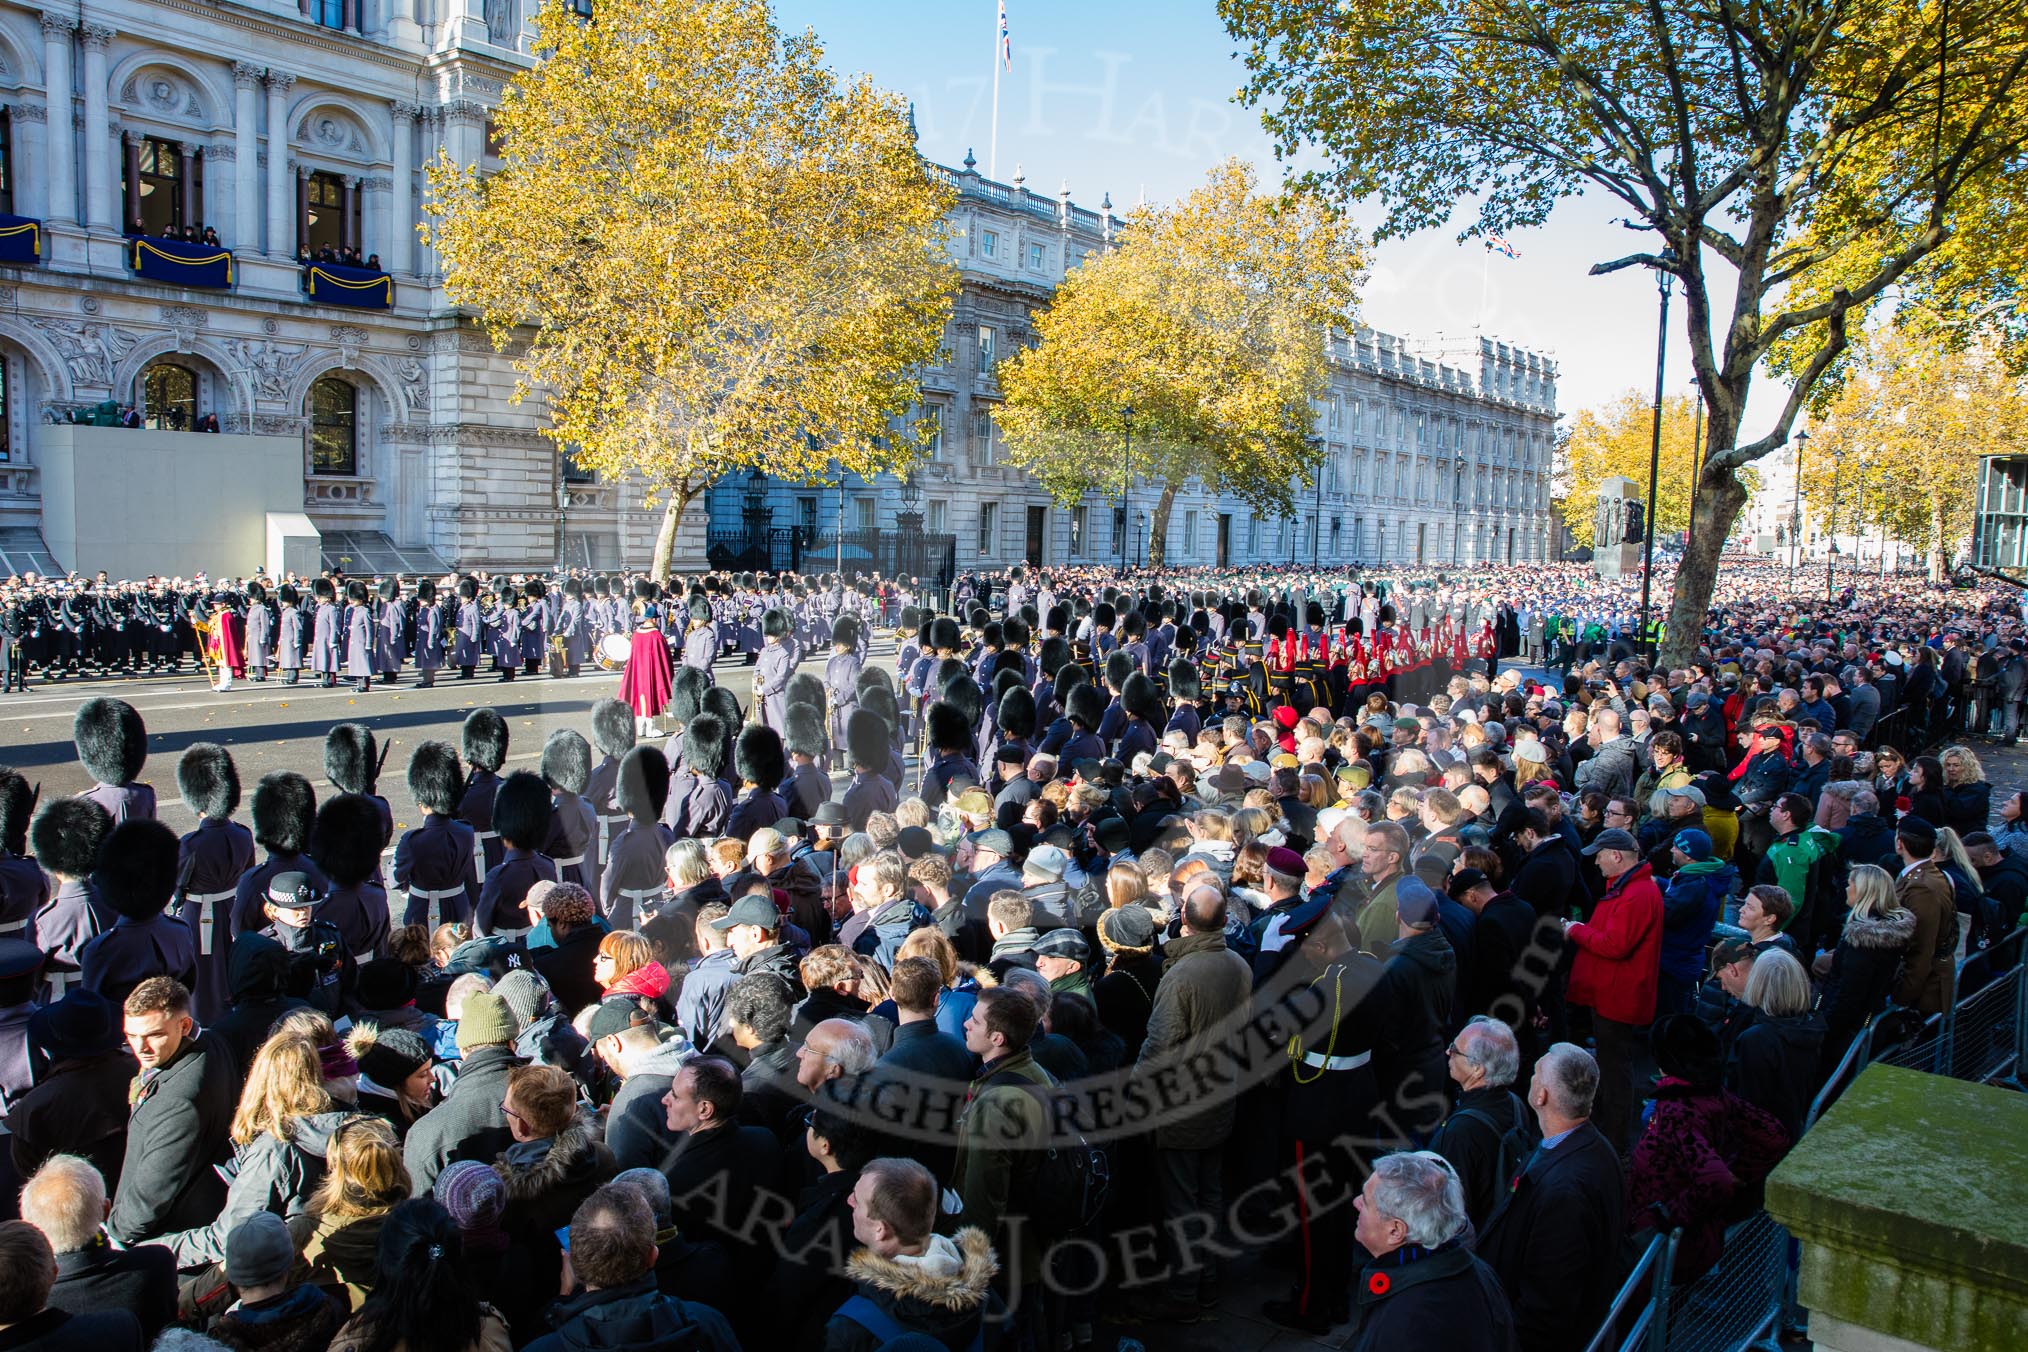 The eastern side of Whitehall, where over 9000 veterans are waiting for the March Past during the Remembrance Sunday Cenotaph Ceremony 2018 at Horse Guards Parade, Westminster, London, 11 November 2018, 11:37.